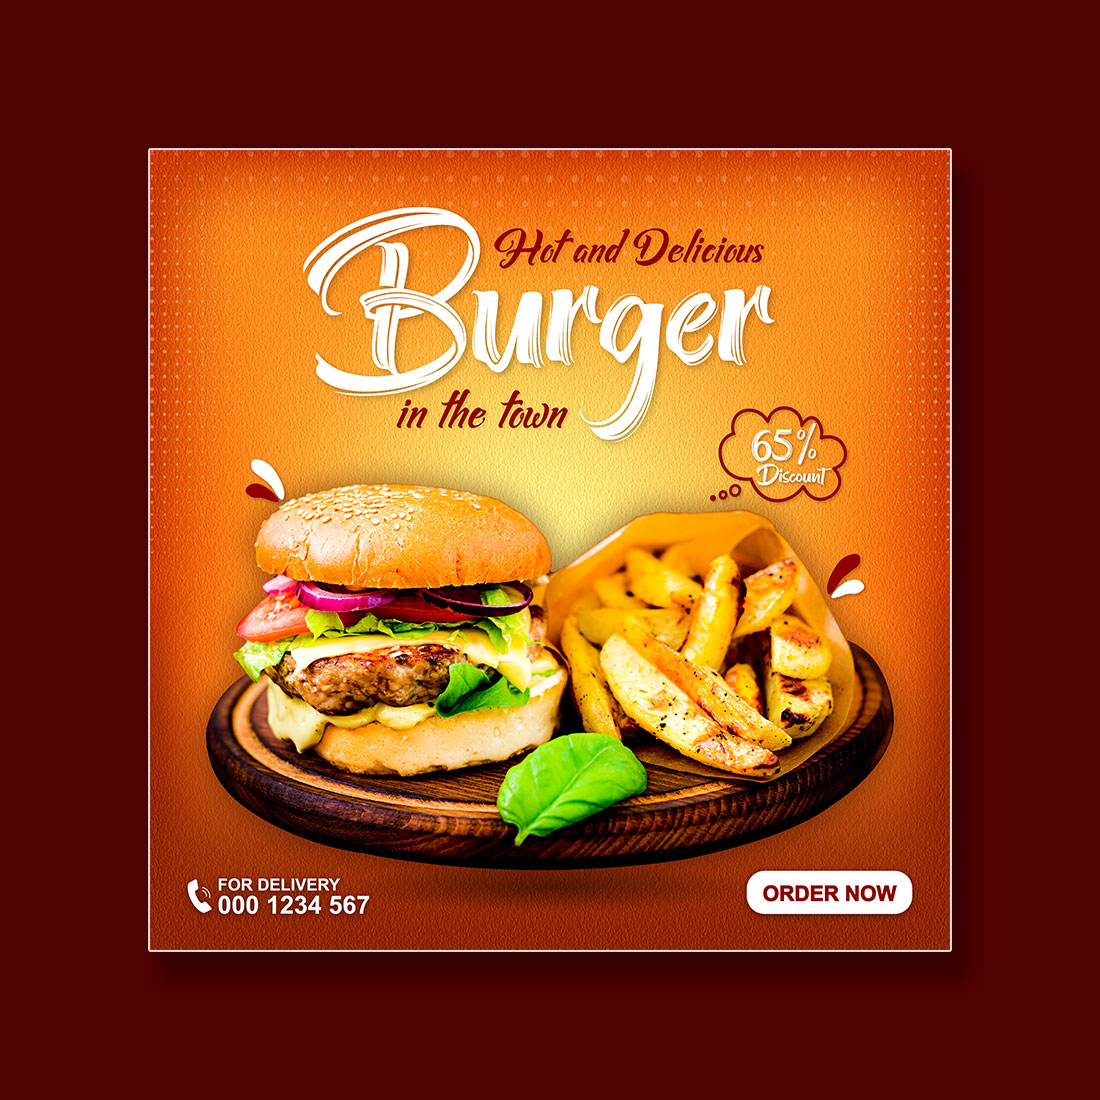 Food menu and delicious burger sale social media promotion template preview image.